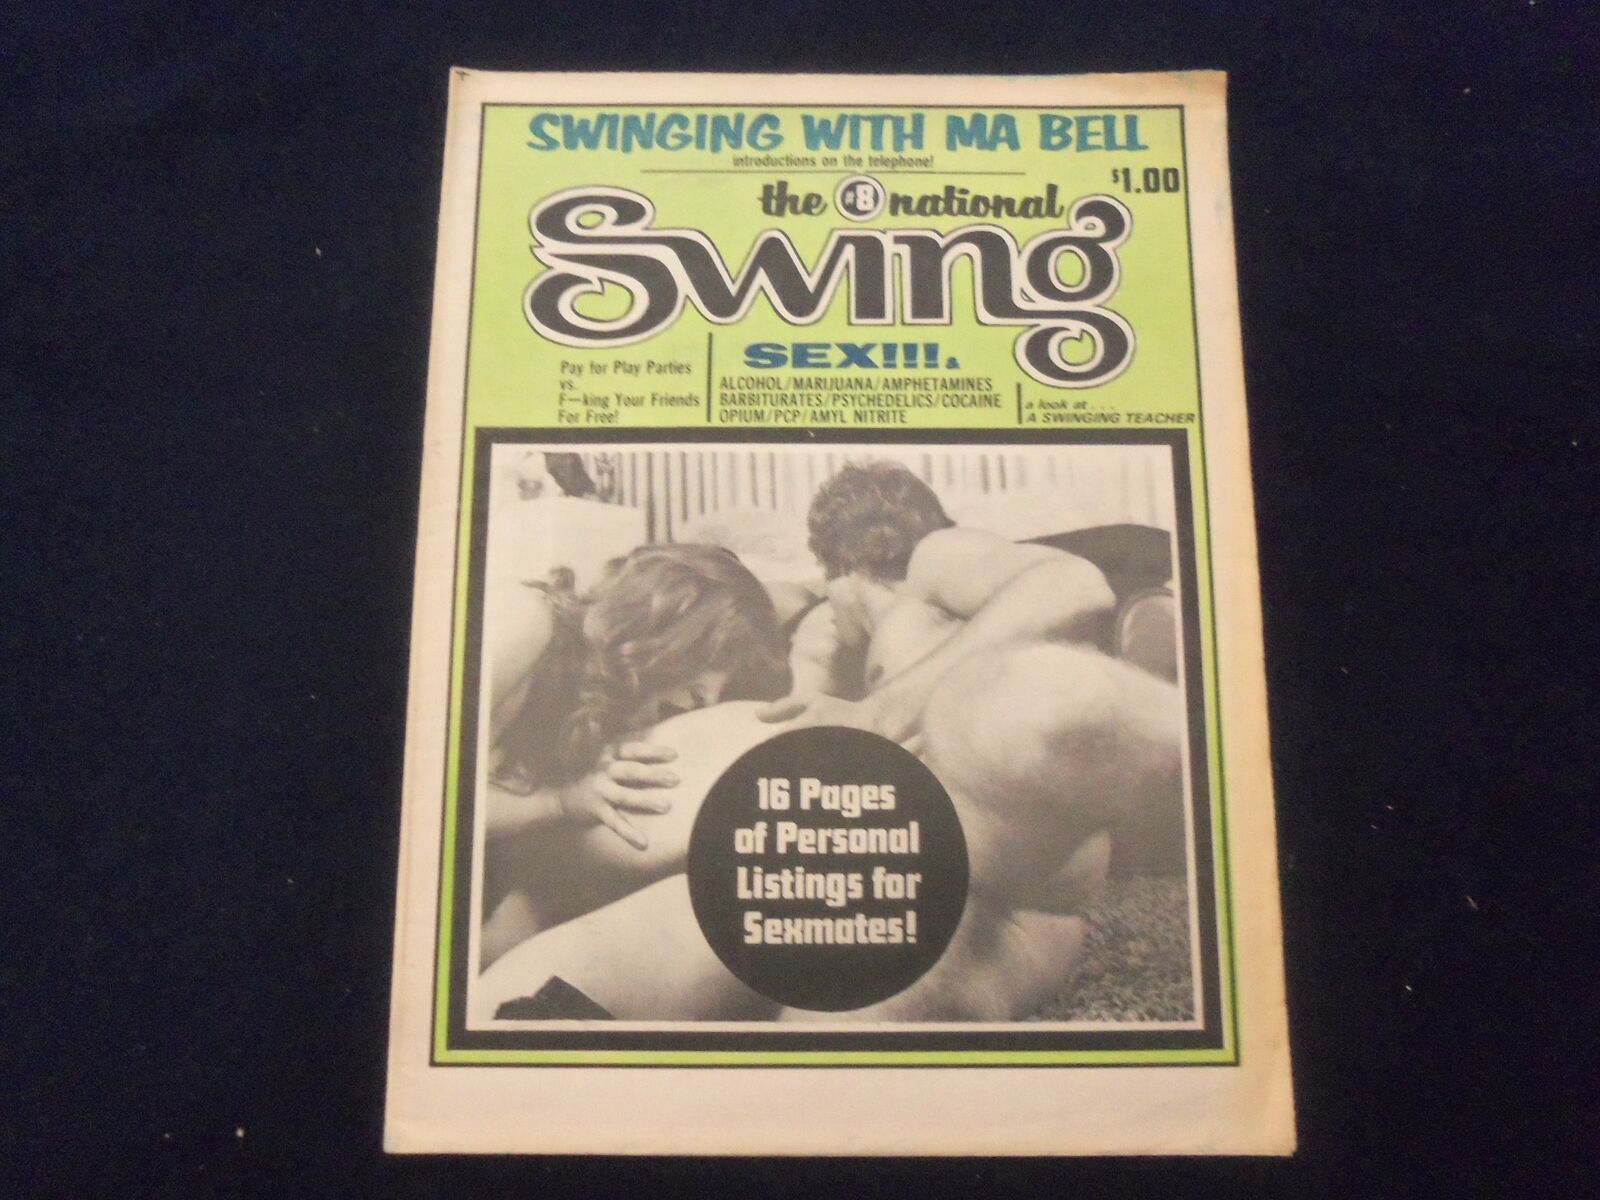 1975 THE NATIONAL SWING NEWSPAPER - SWINGING WITH MA BELL - NP 7314